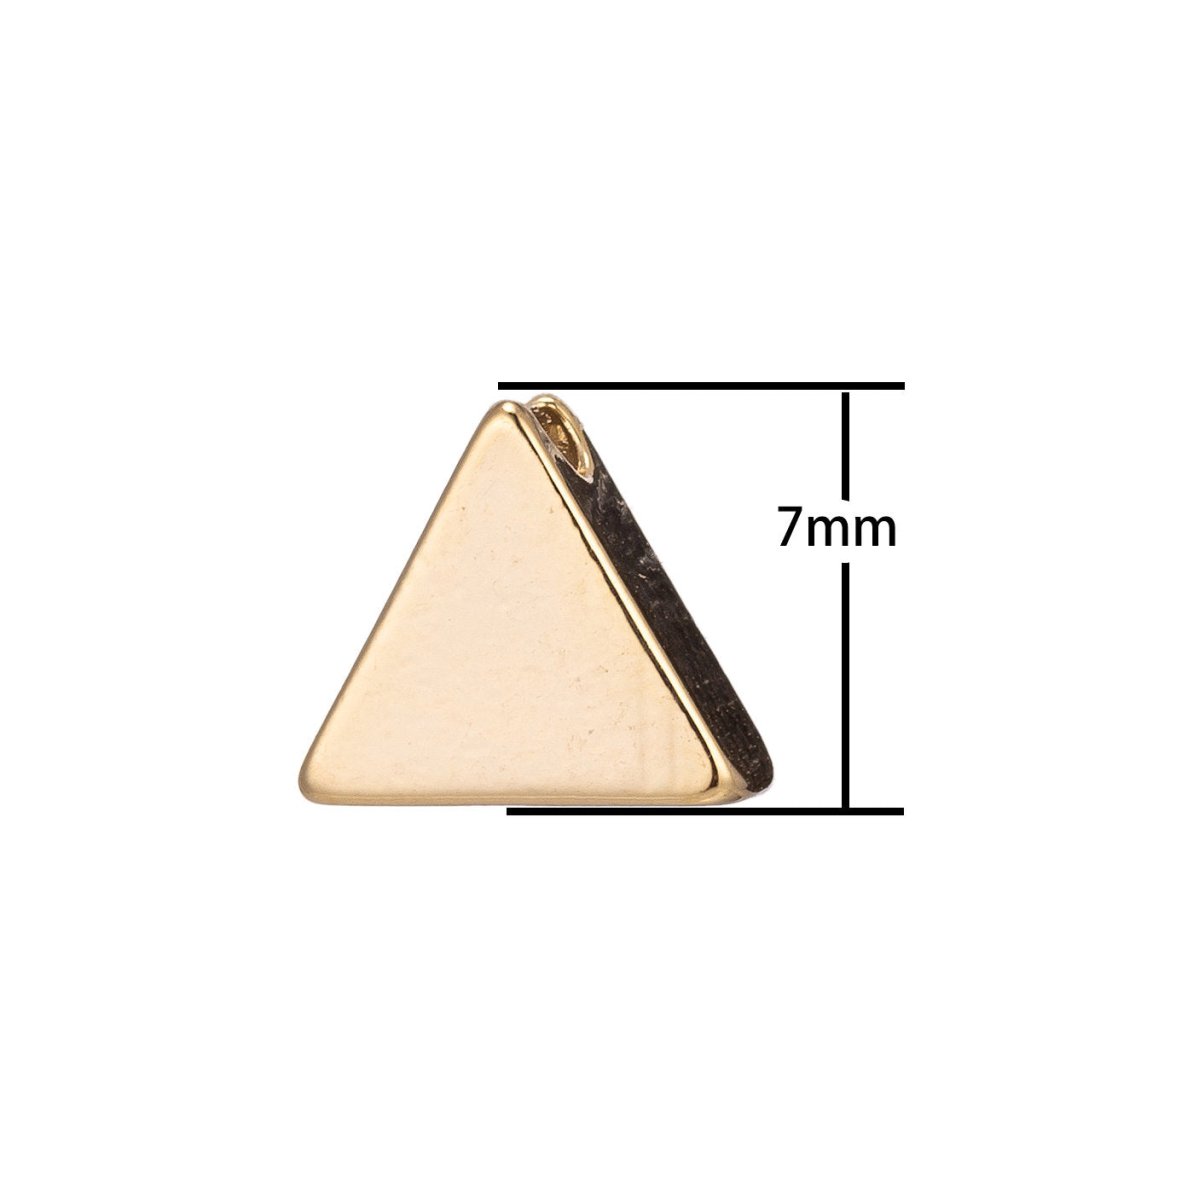 Gold Triangle Charm - 18k Gold Filled Over Brass - Gold Connector - 6mm / 7mm - Triangle Bead - Bracelet Necklace Connector link B-142 - DLUXCA